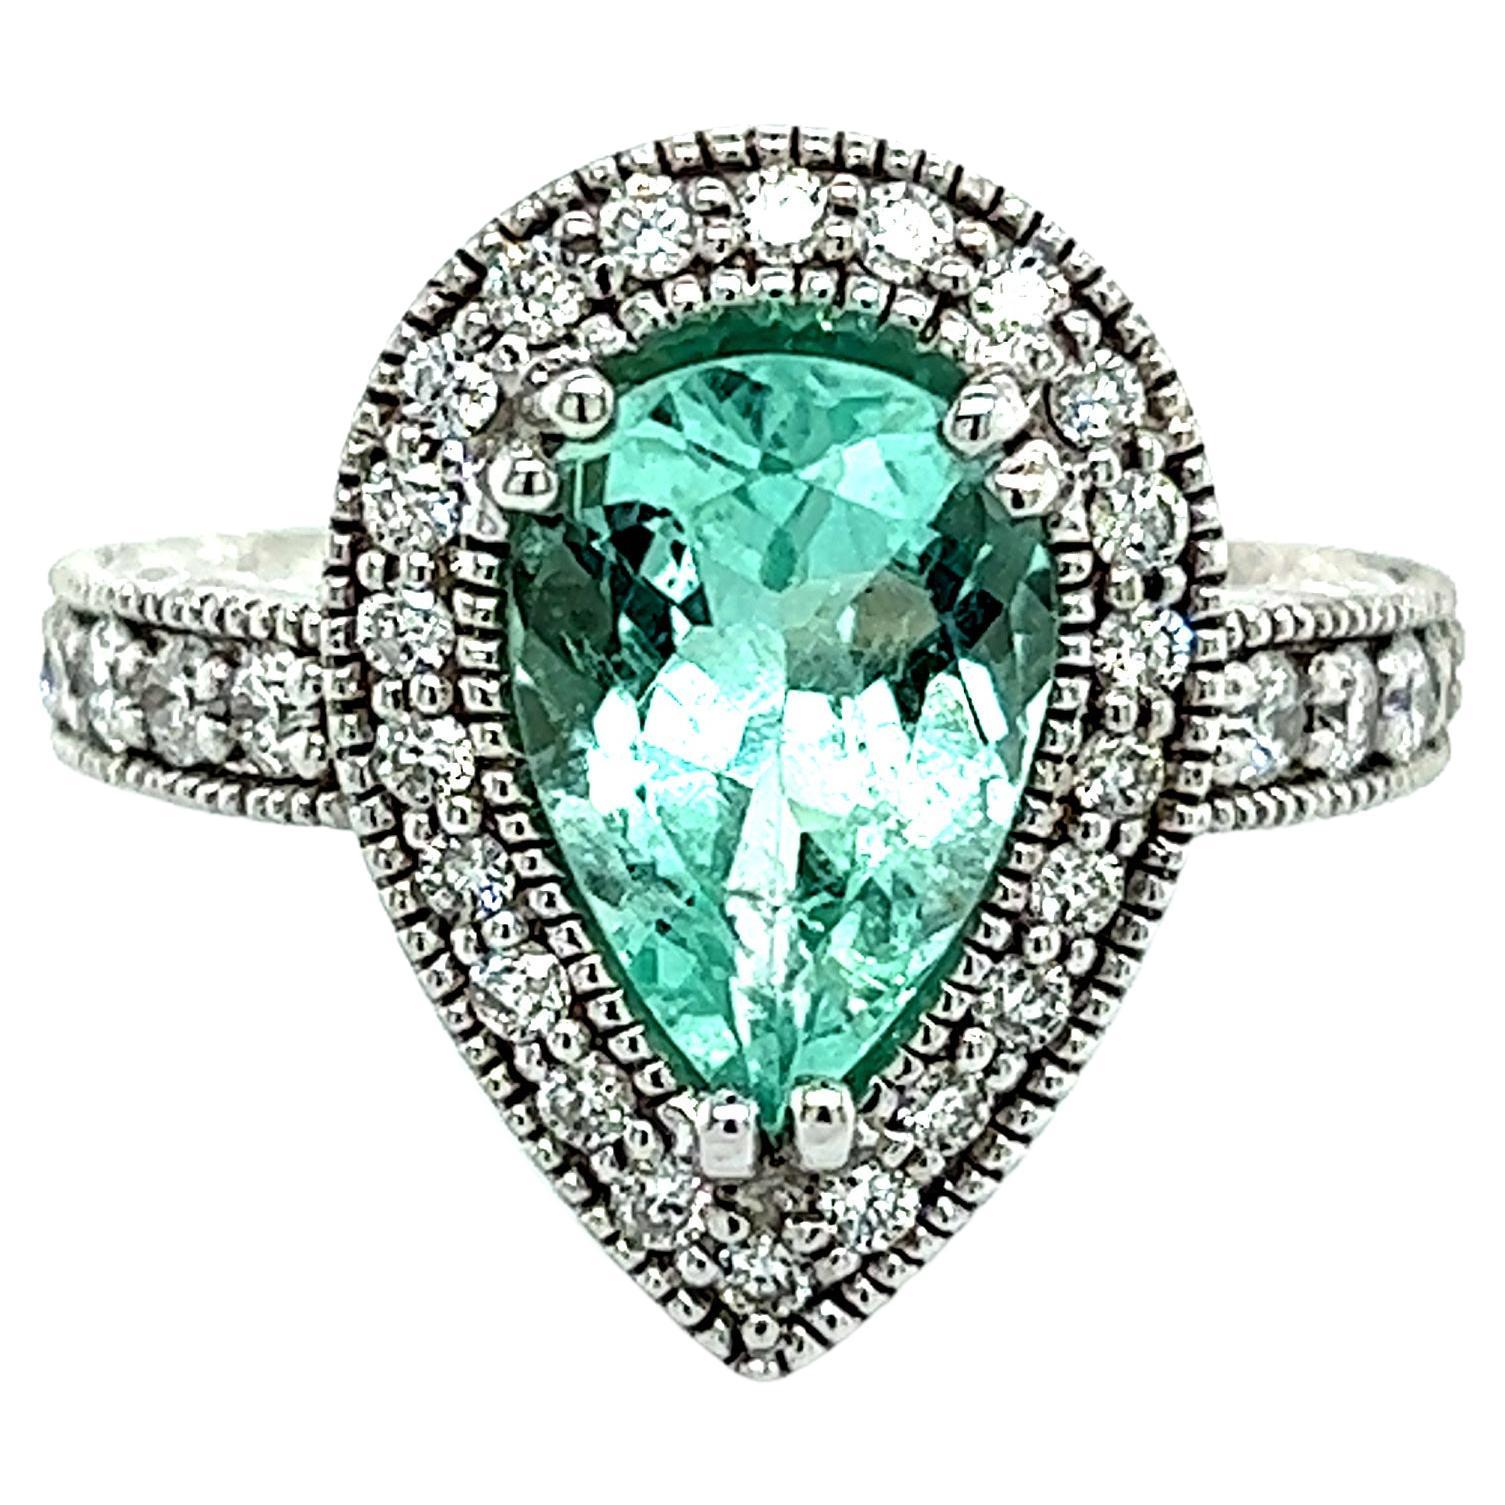 Natural Emerald Diamond Ring Size 6.5 14k W Gold 3.27 TCW Certified  For Sale